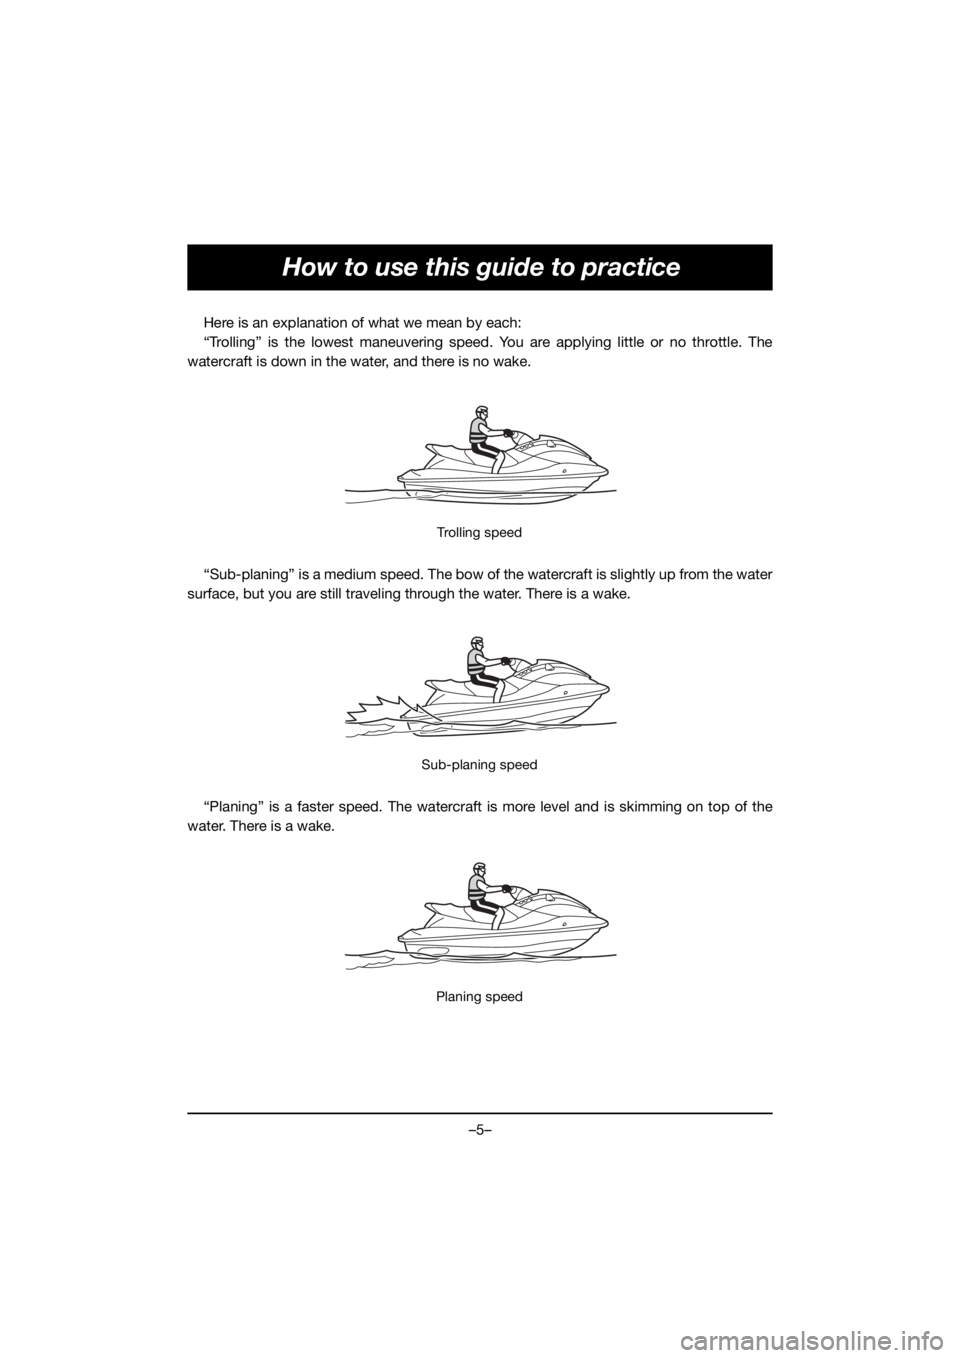 YAMAHA EX 2021  Manual de utilização (in Portuguese) –5–
How to use this guide to practice
Here is an explanation of what we mean by each:
“Trolling” is the lowest maneuvering speed. You are applying little or no throttle. The
watercraft is down